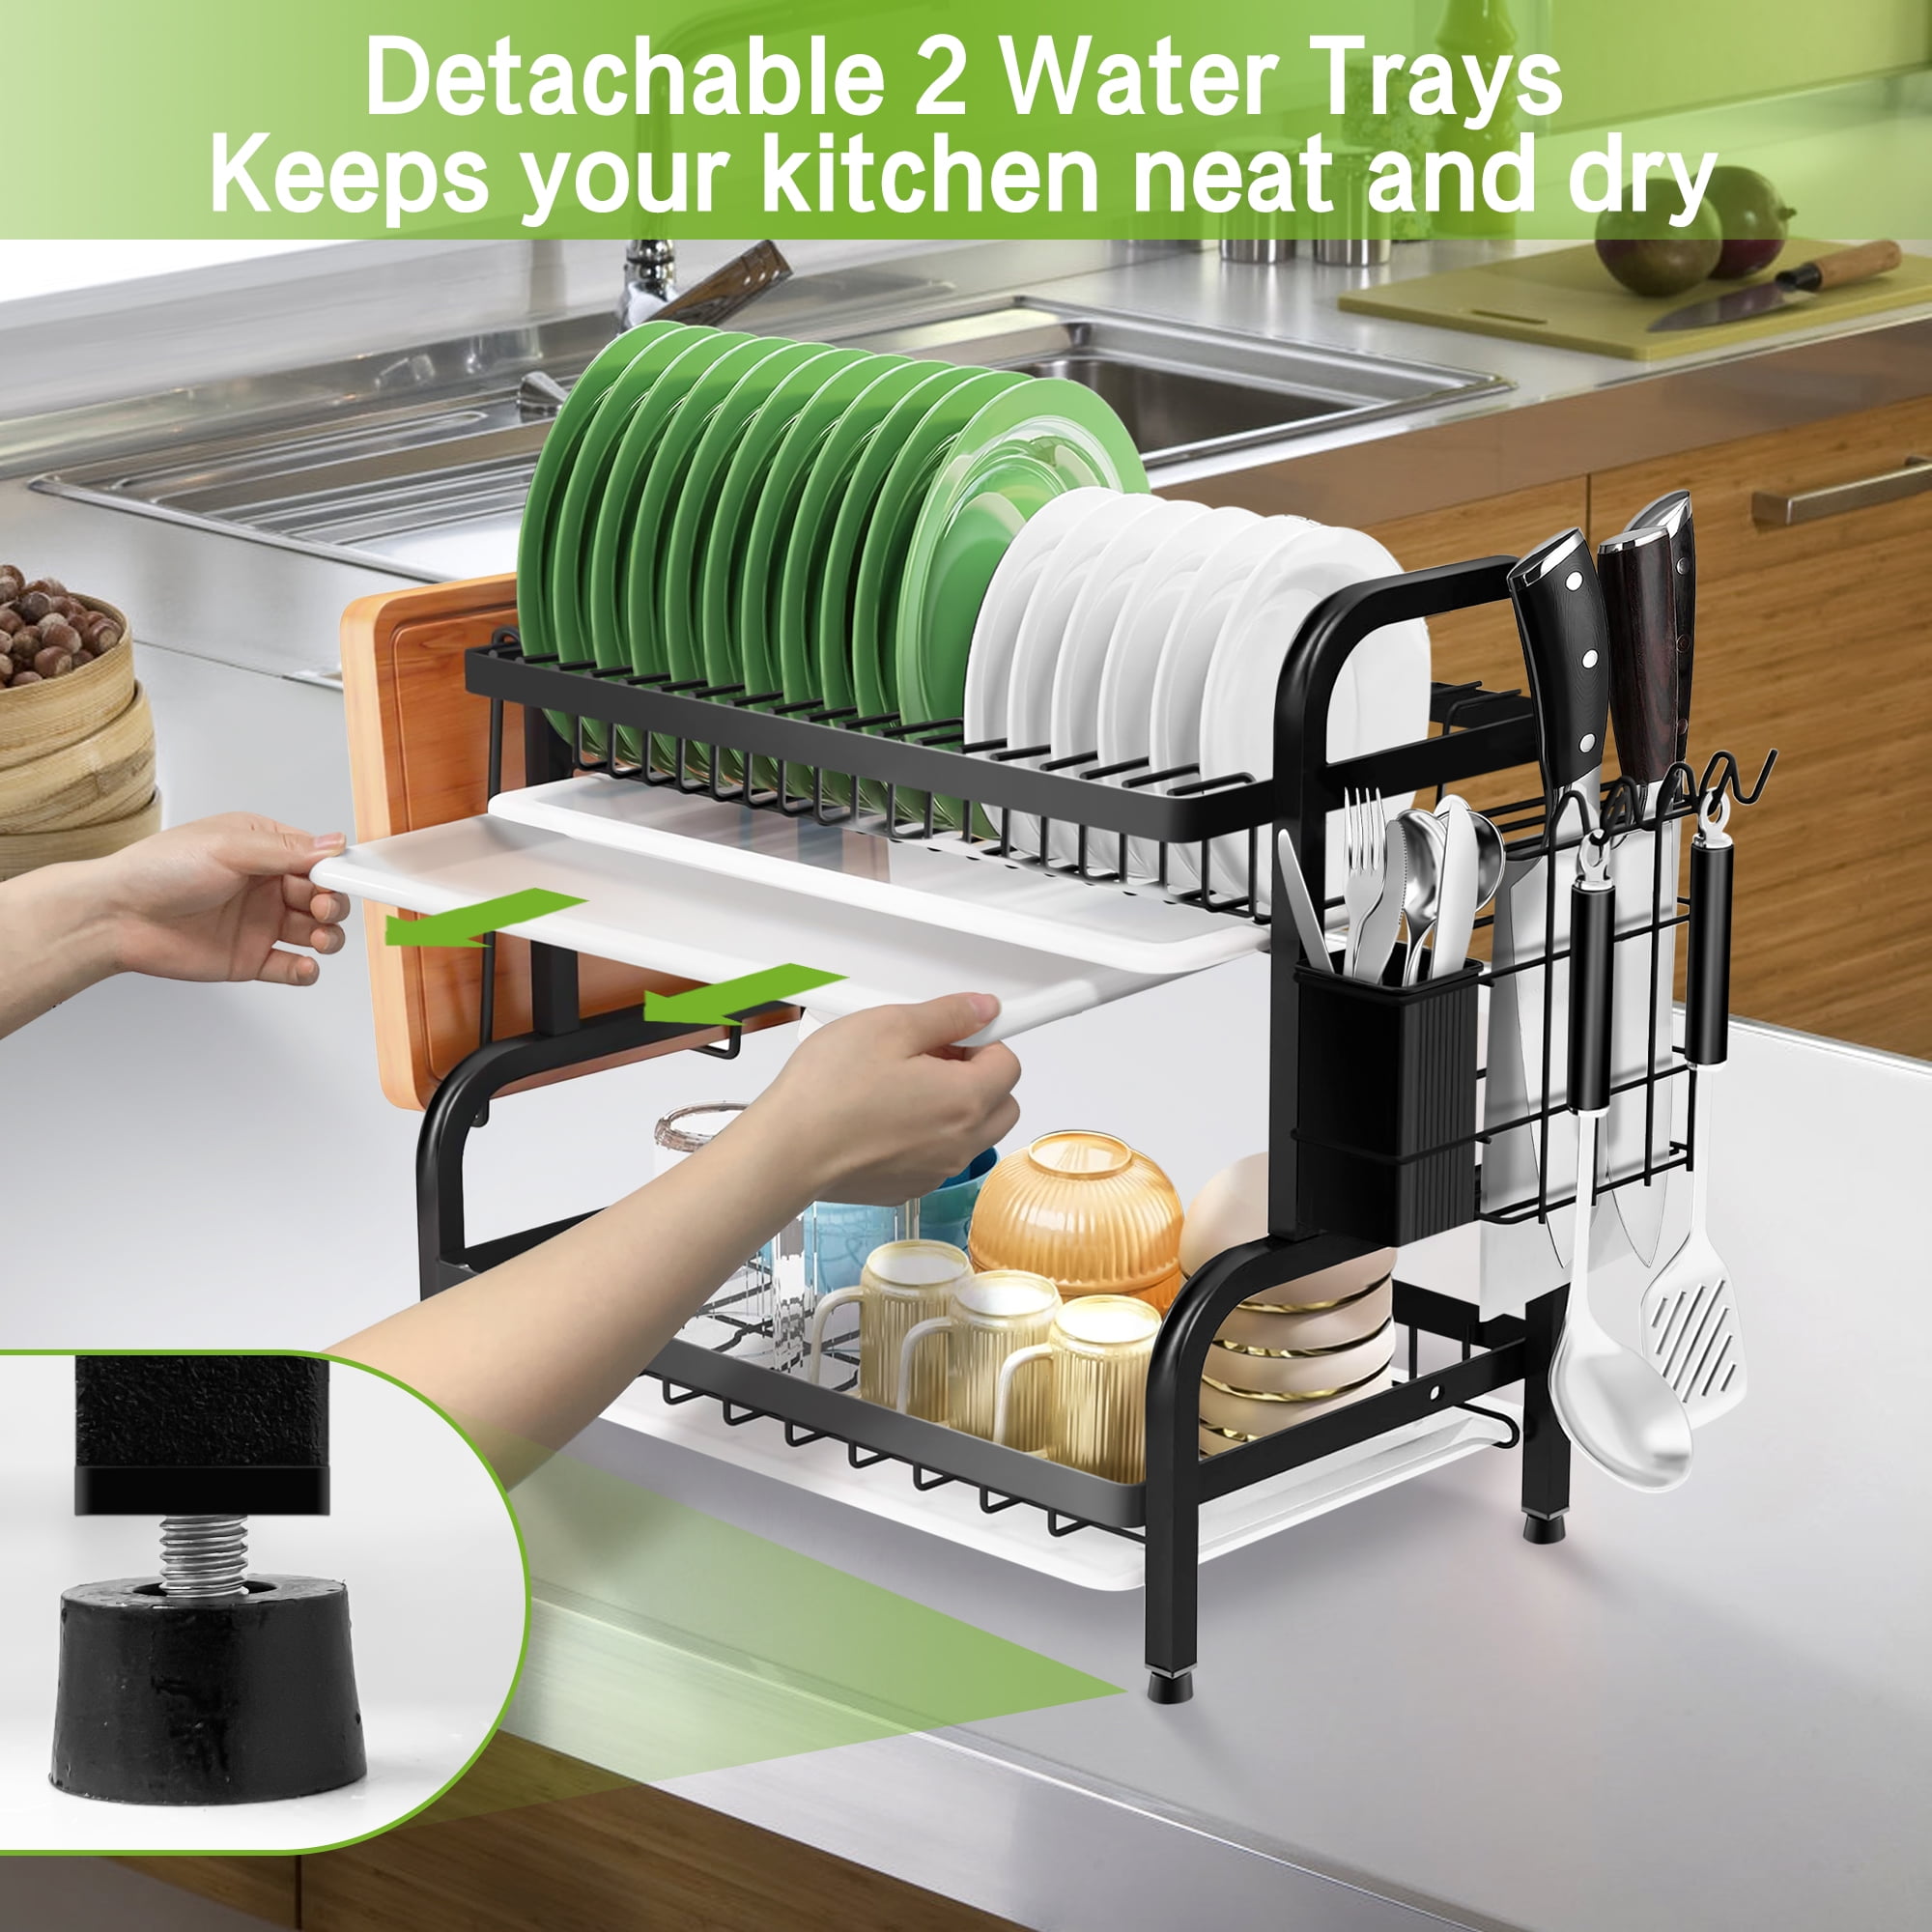 SHAINFUN Dish Drying Rack with Drainboard Set,2-Tier Dish Rack for Kitchen Counter,Rust Prevention Large Capacity Dish Drainer Organizer with